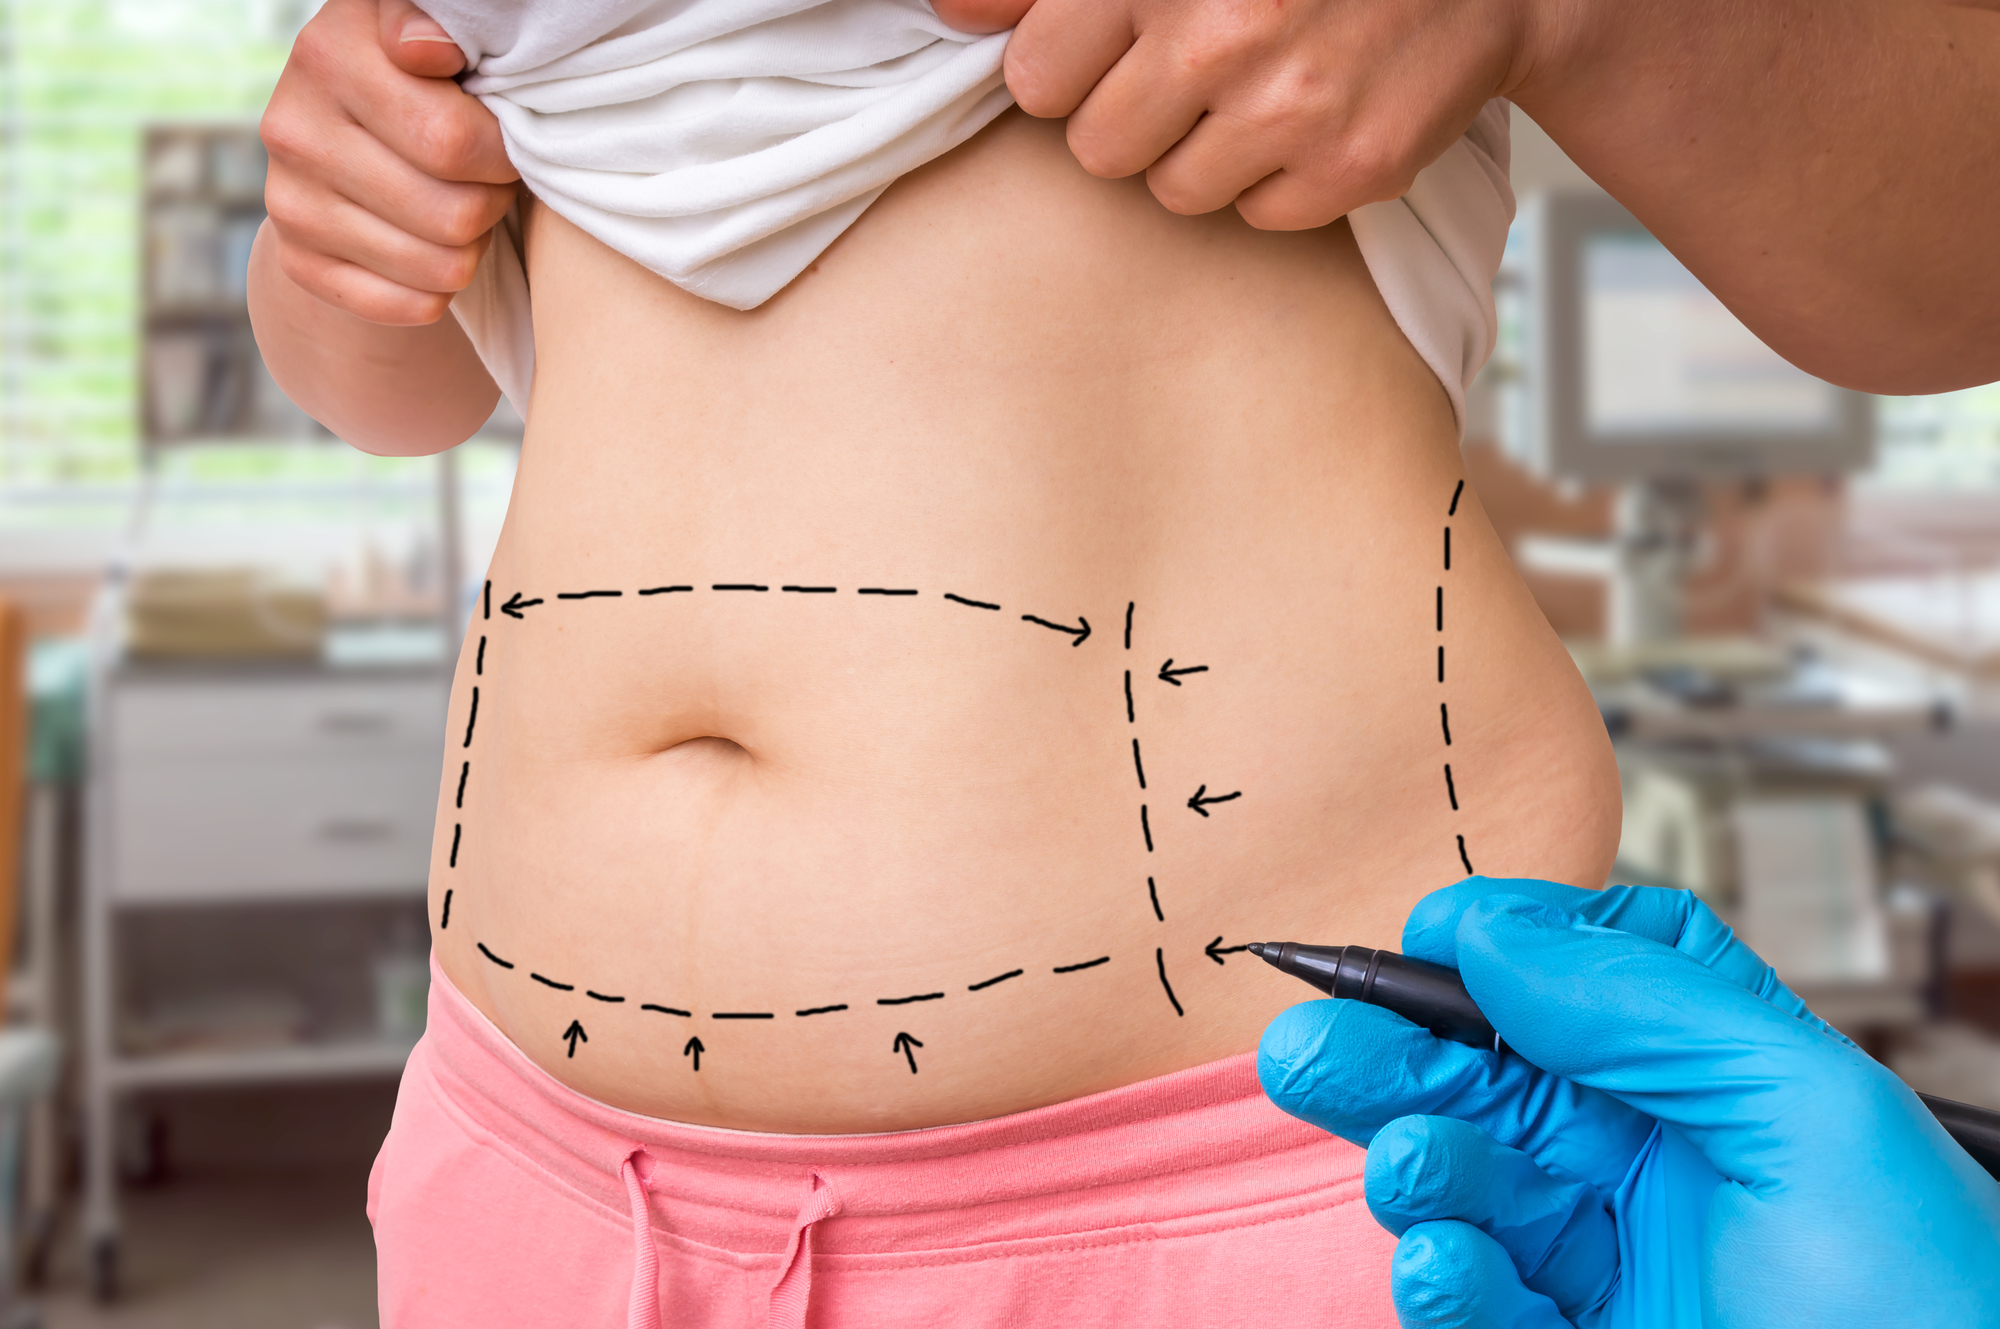 How to Reduce the Appearance of Your Tummy Tuck Scars - Berlet